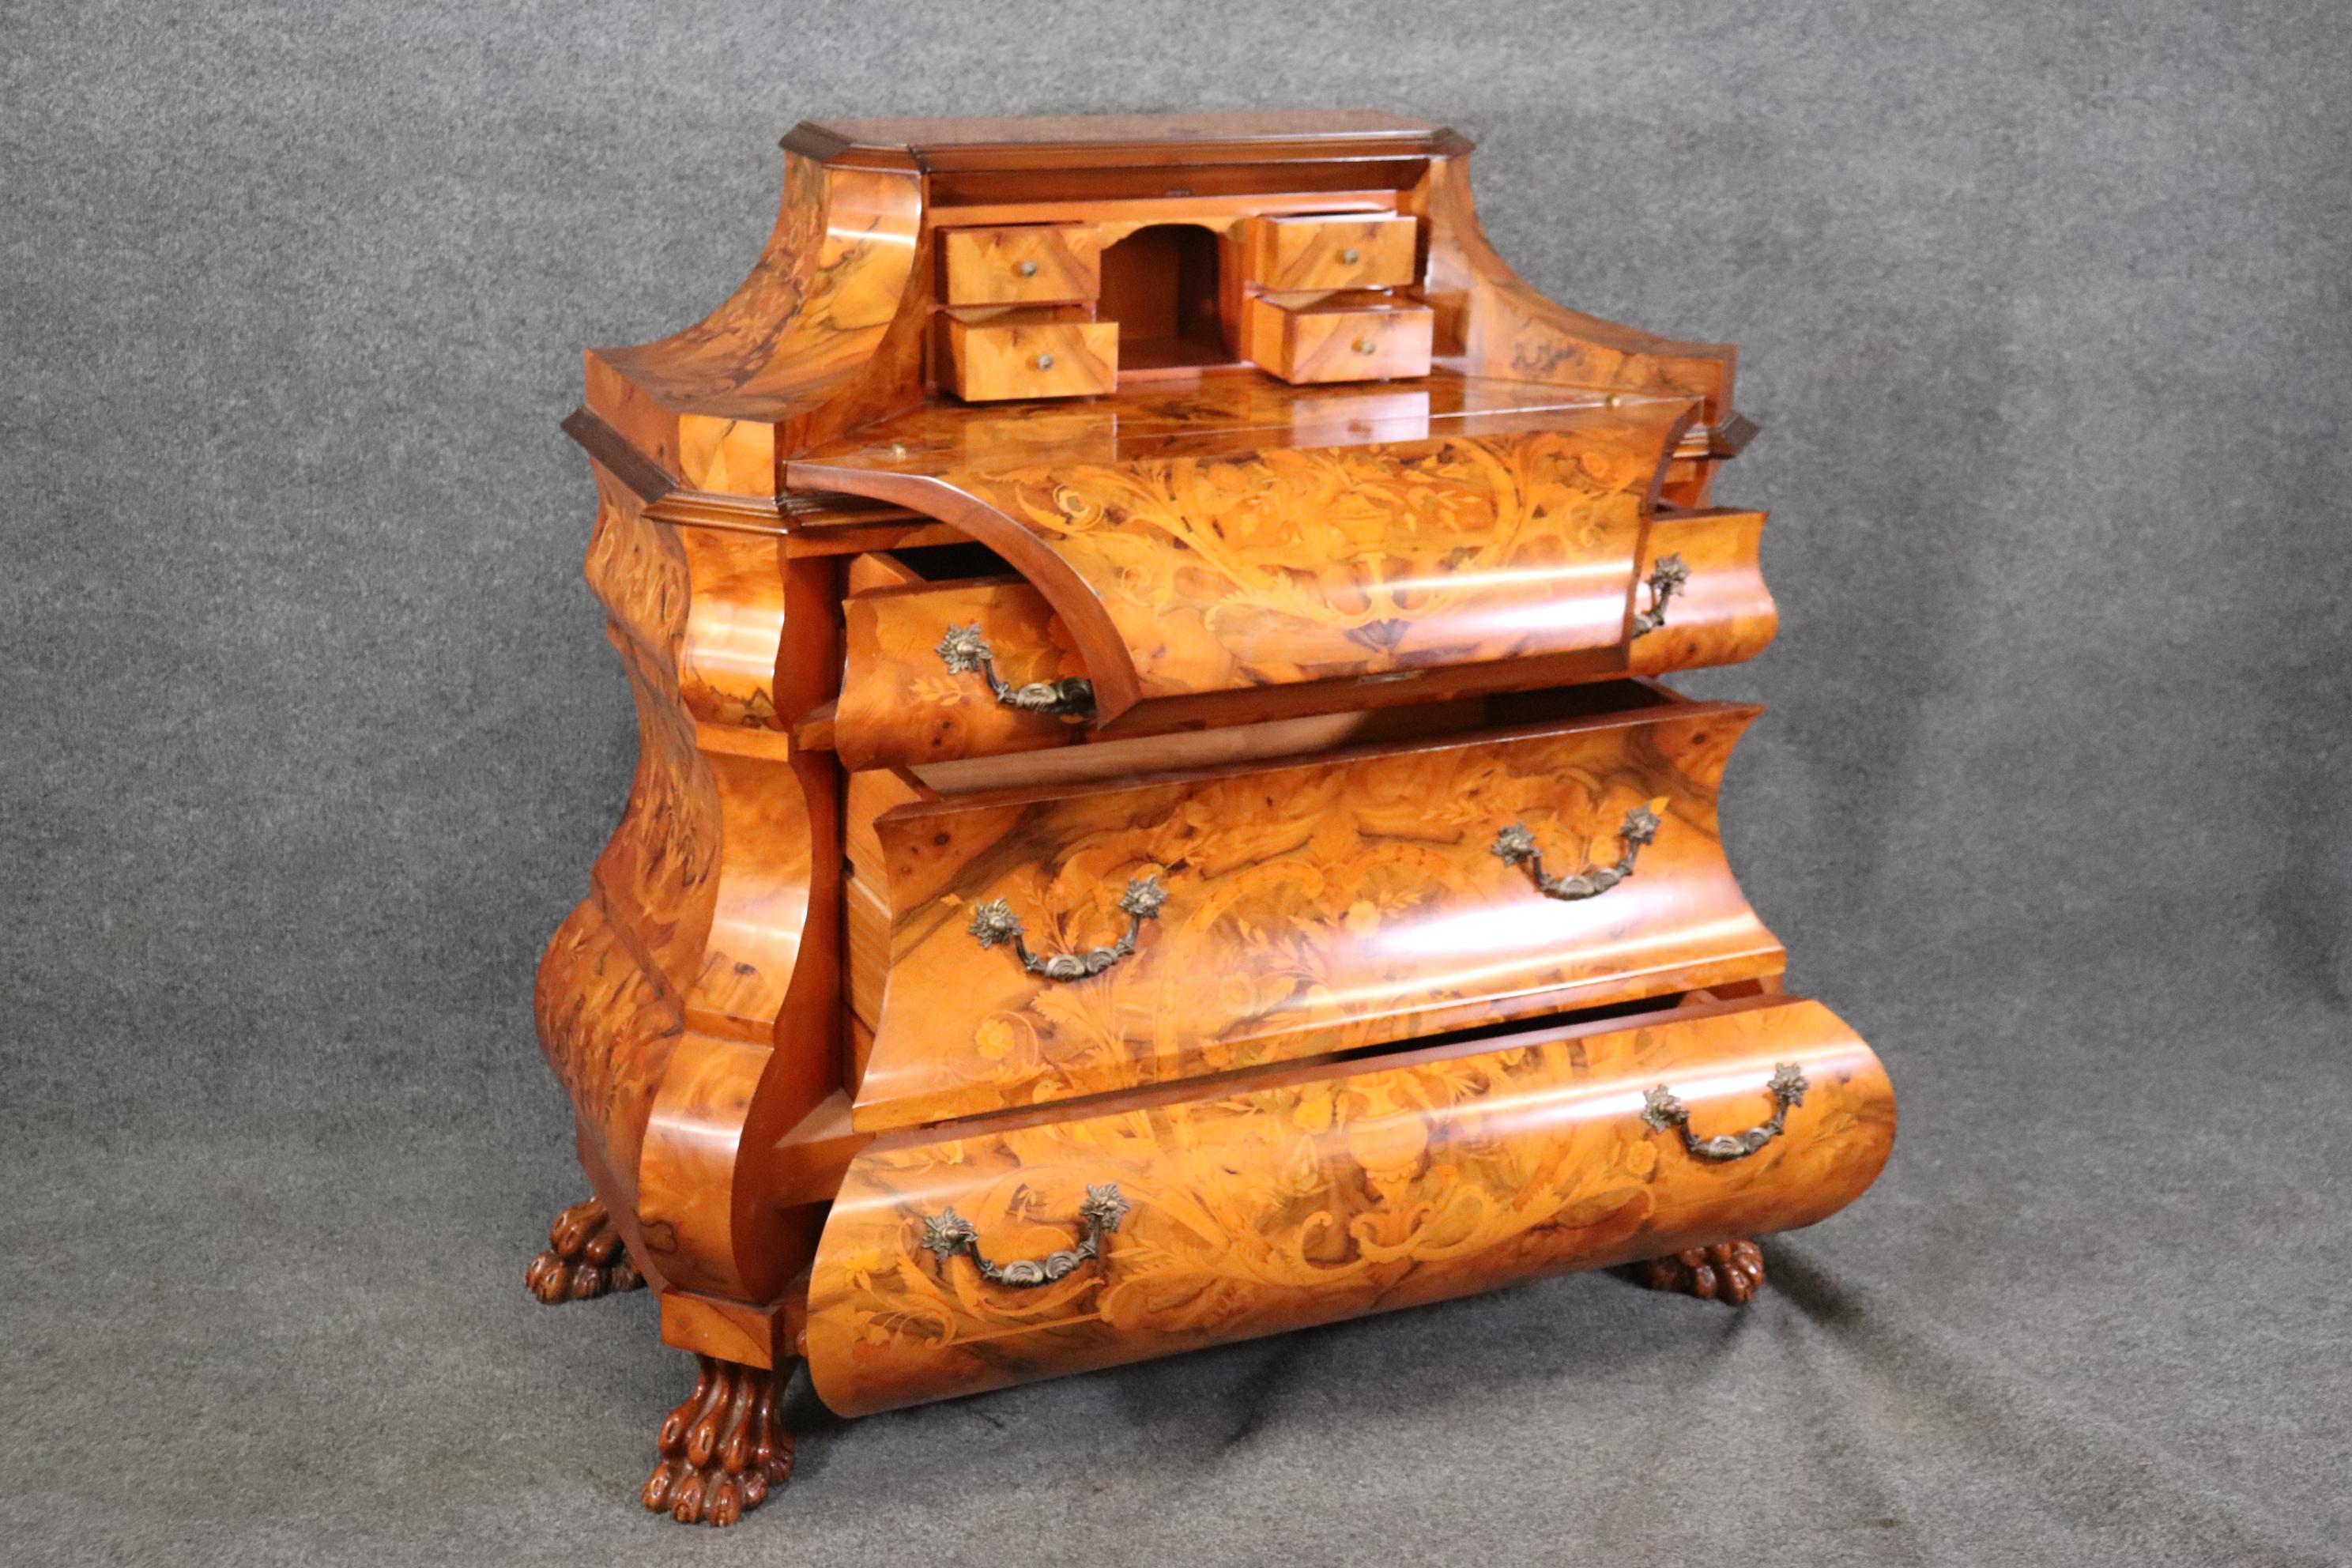 This is a gorgeous Maggiolini of Italy Inlaid to death secretary desk with a fantastic finish and incredible inlay of sparys of flowers in vases and the condition is very good for a used piece. The piece opens up with a curved lid and a key is